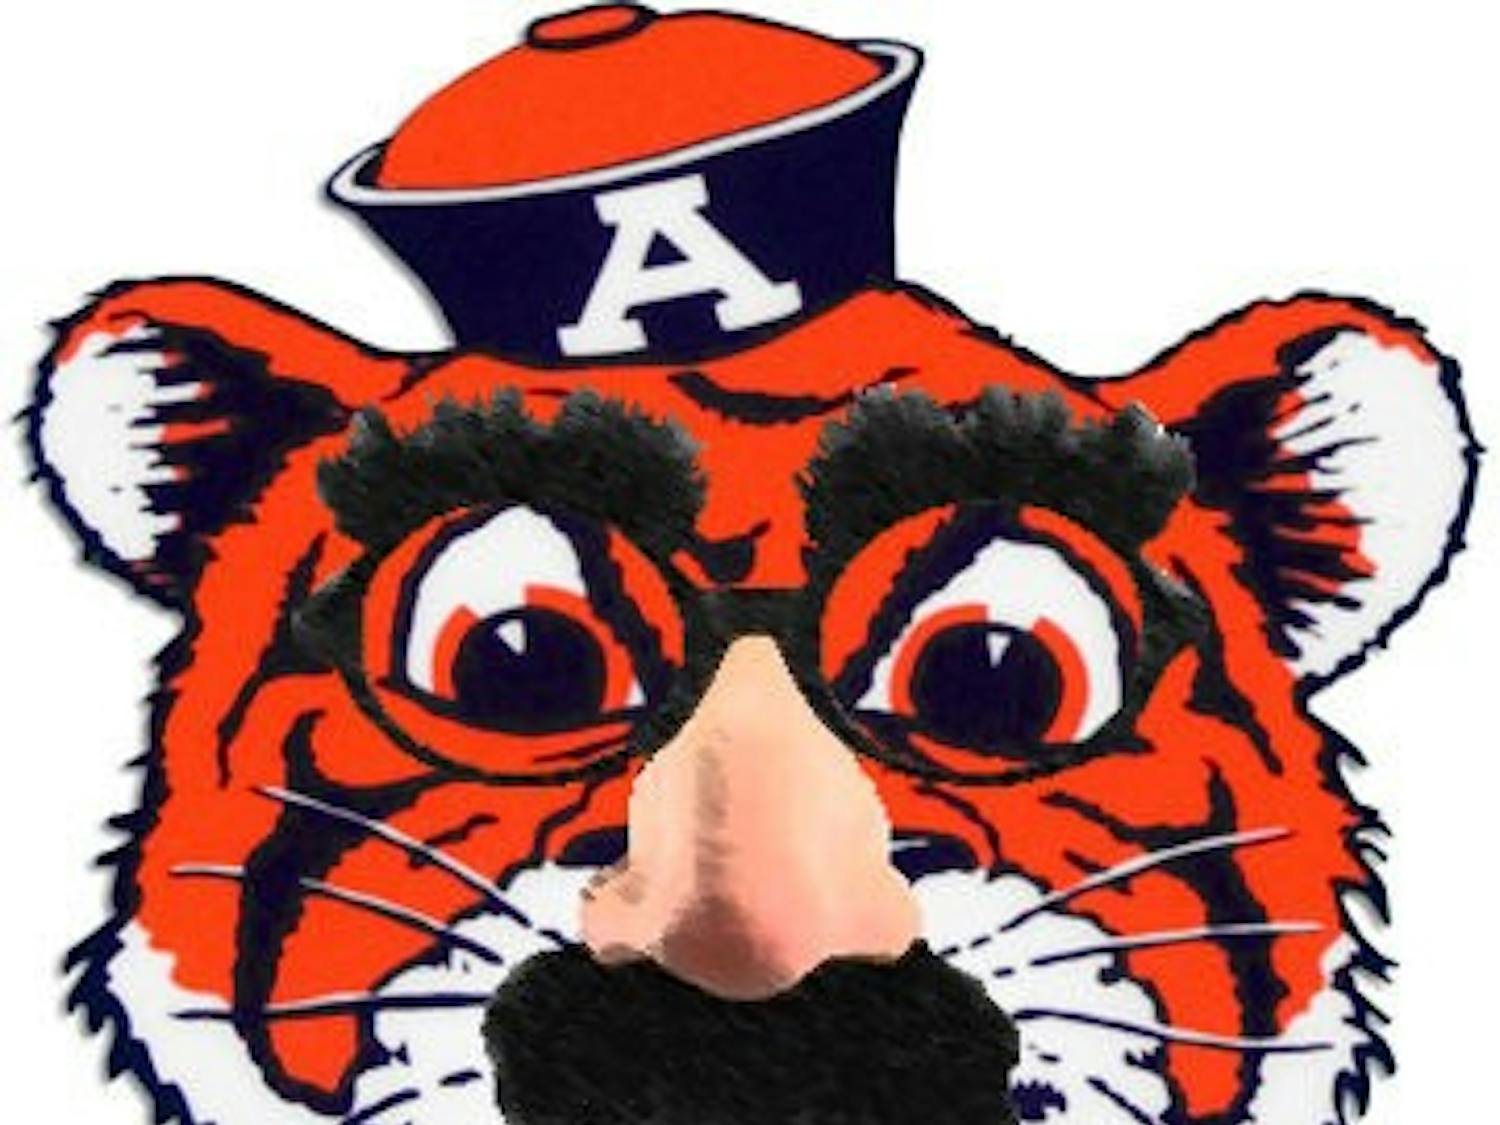 The unofficial logo of The Lee County Flannel Club, adopted from the old "Aubie" logo.